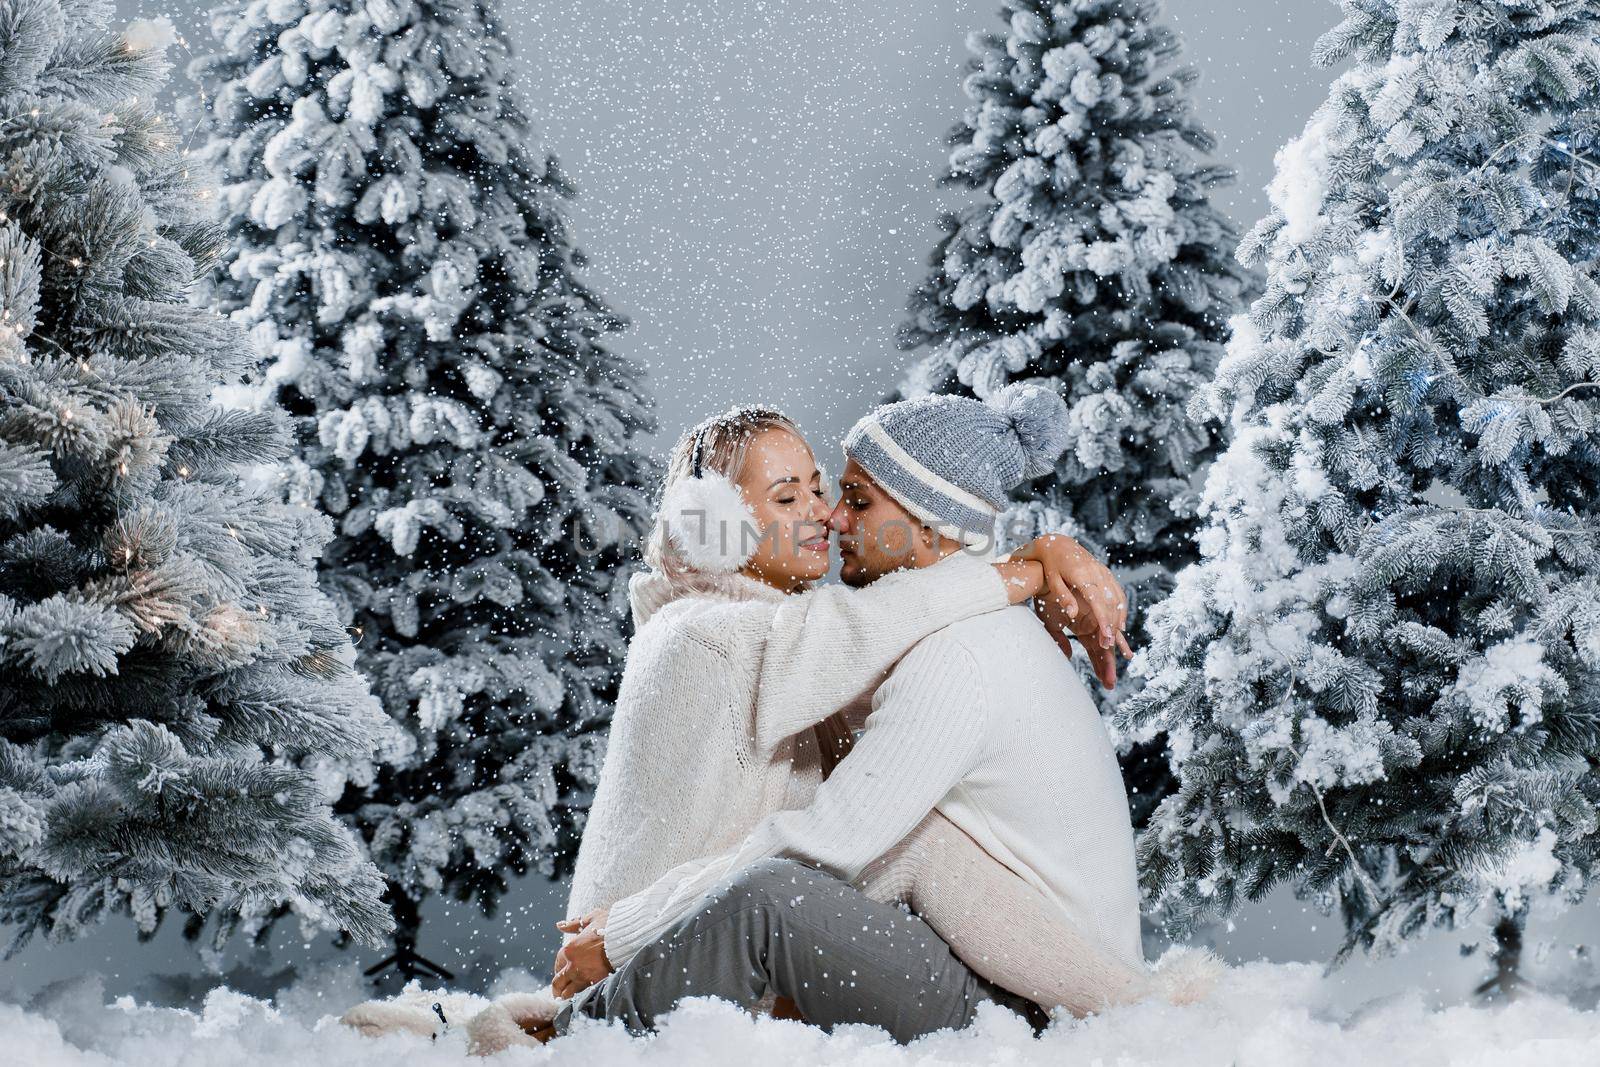 Couple hugging near christmass trees. Winter holidays. Love story of young couple weared white pullovers. Happy man and young woman love each other.